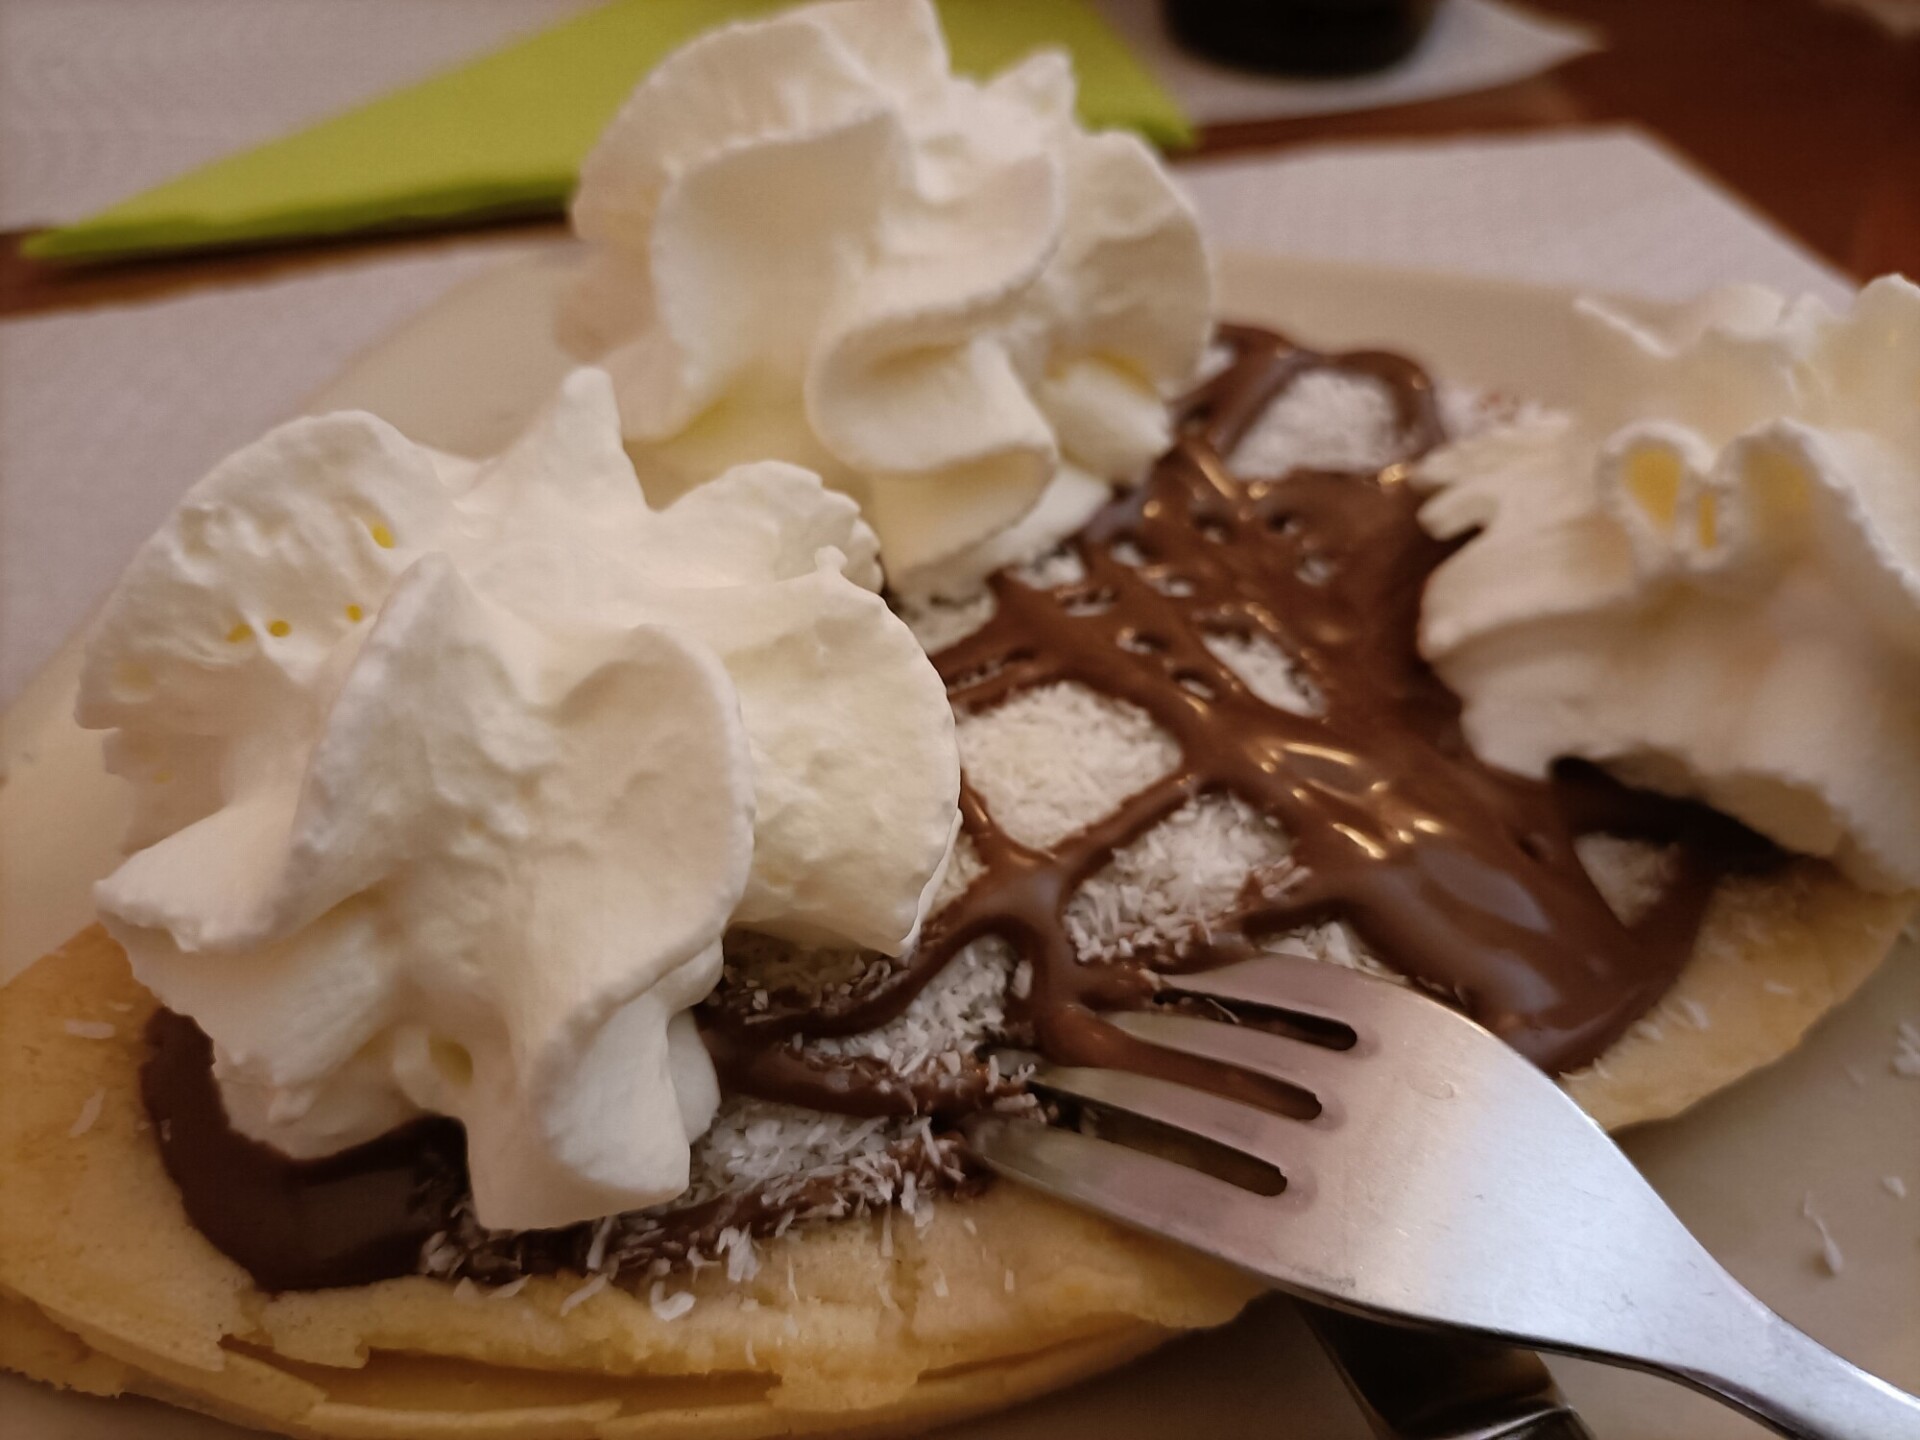 Decadent Chocolate and Whipped Cream Crepes